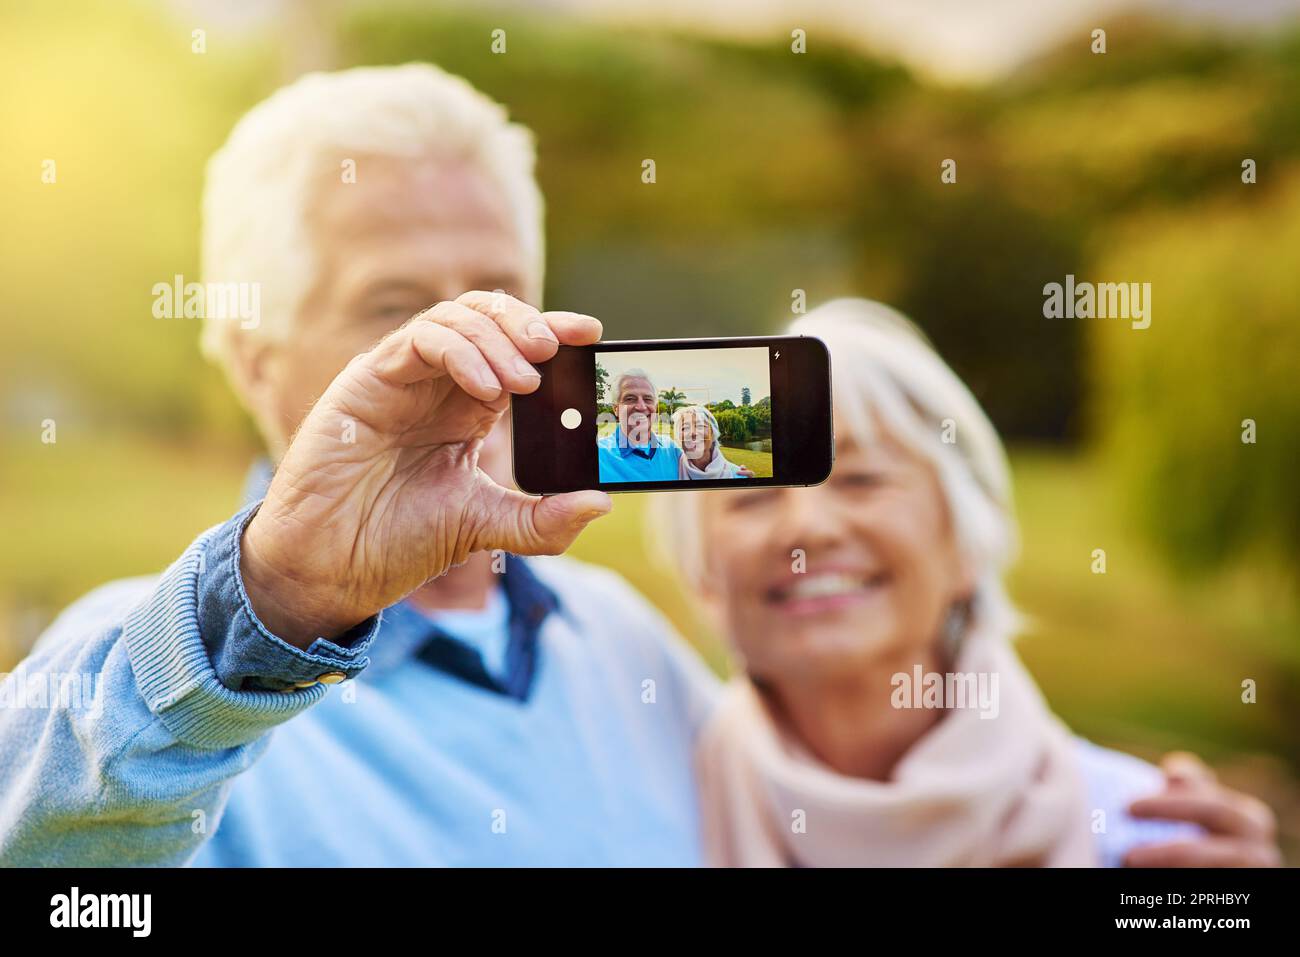 Joyful moments. a senior couple taking a photo together in a park. Stock Photo